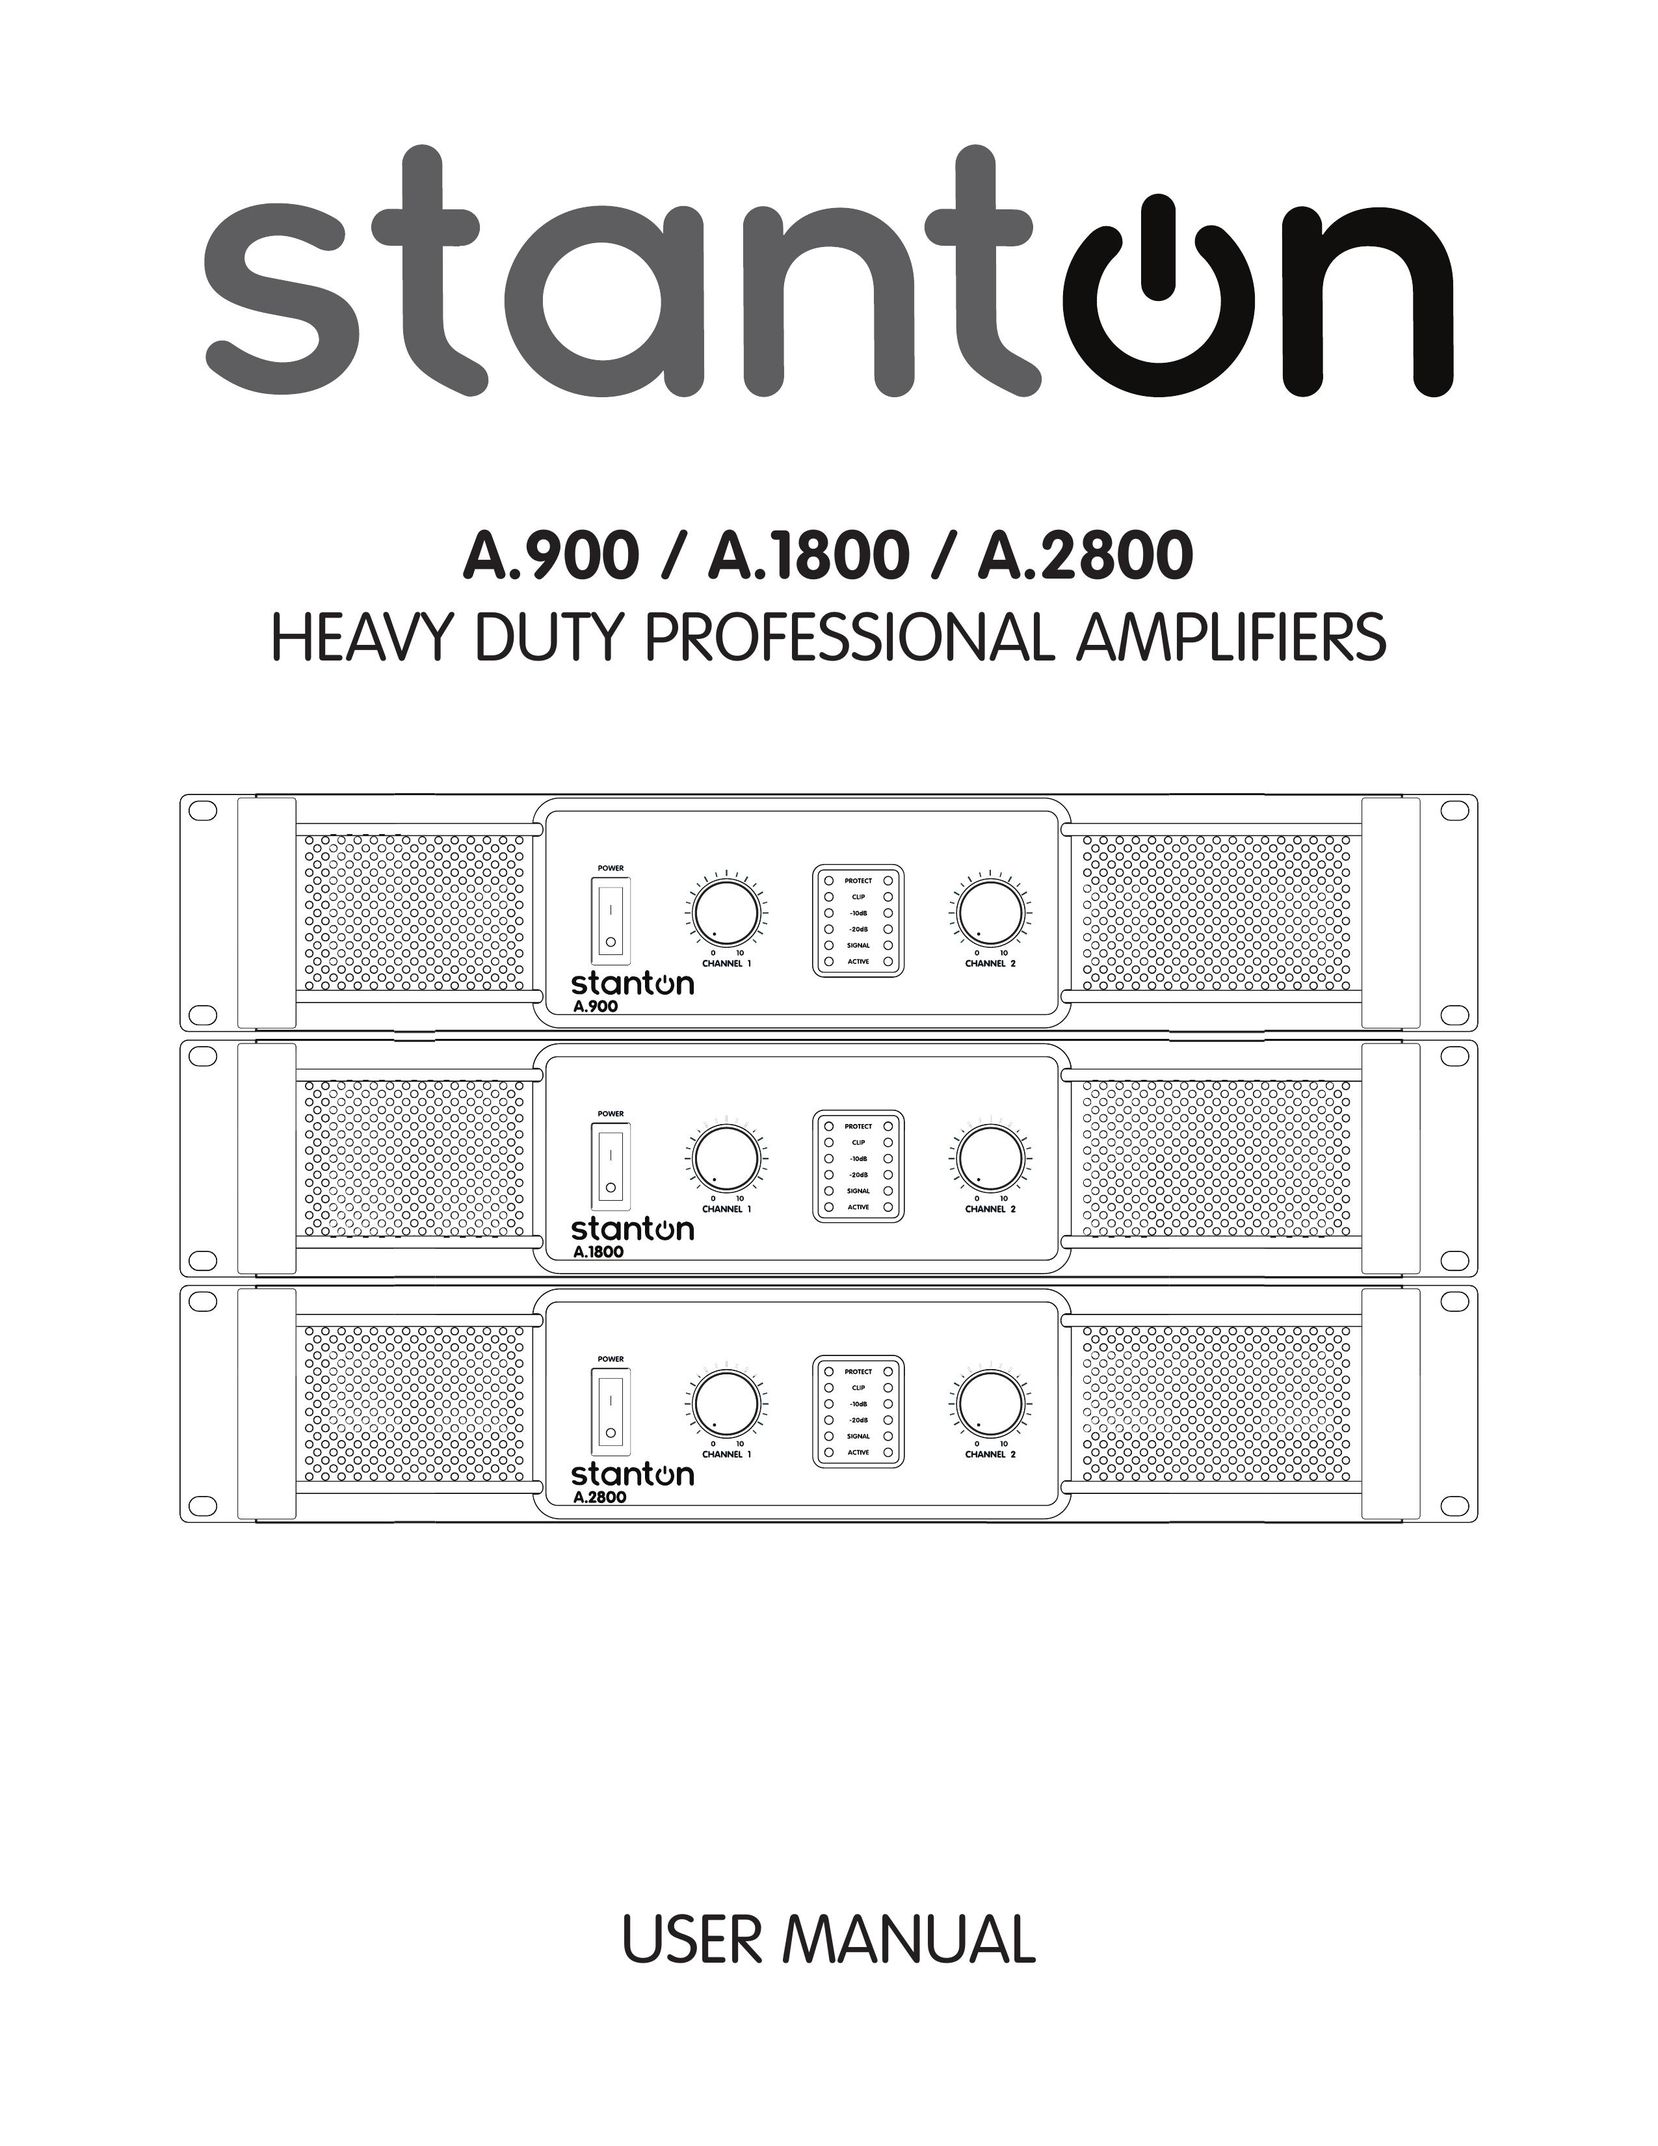 Stanton A.2800 Stereo Amplifier User Manual